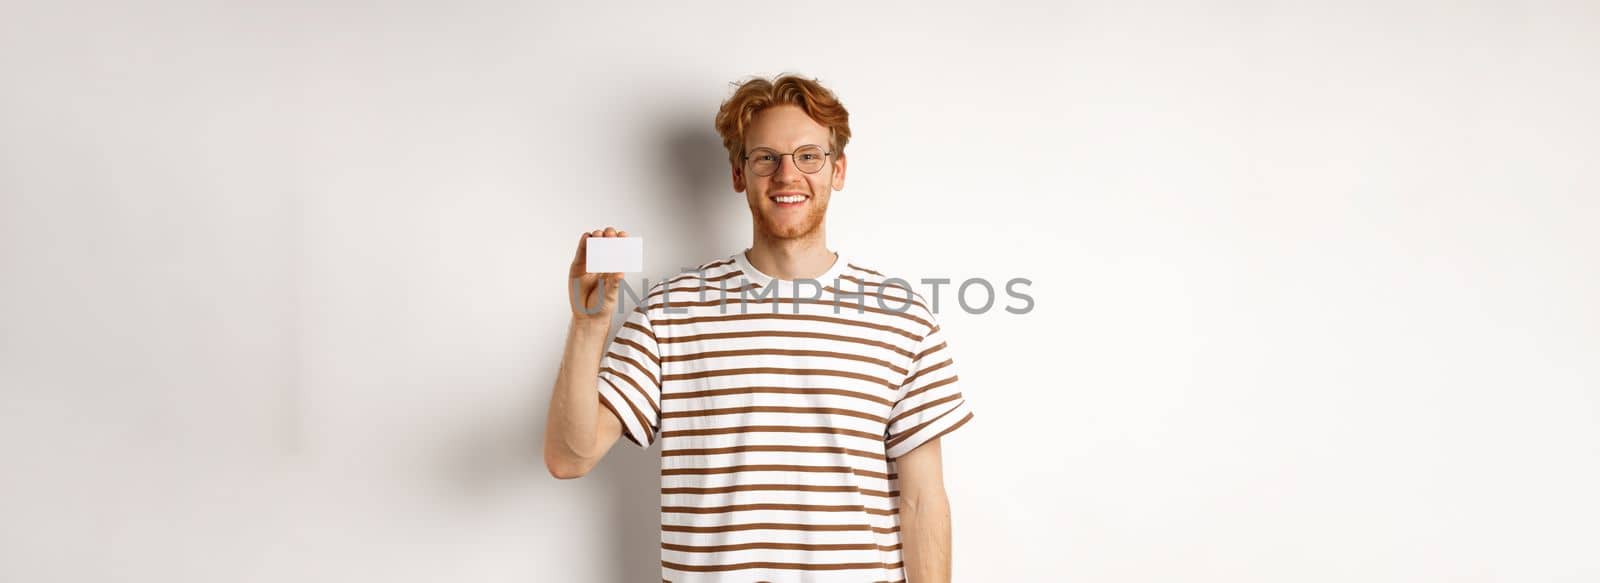 Shopping and finance concept. Smiling young man with bristle and red hair showing plastic credit card and looking happy, white background.